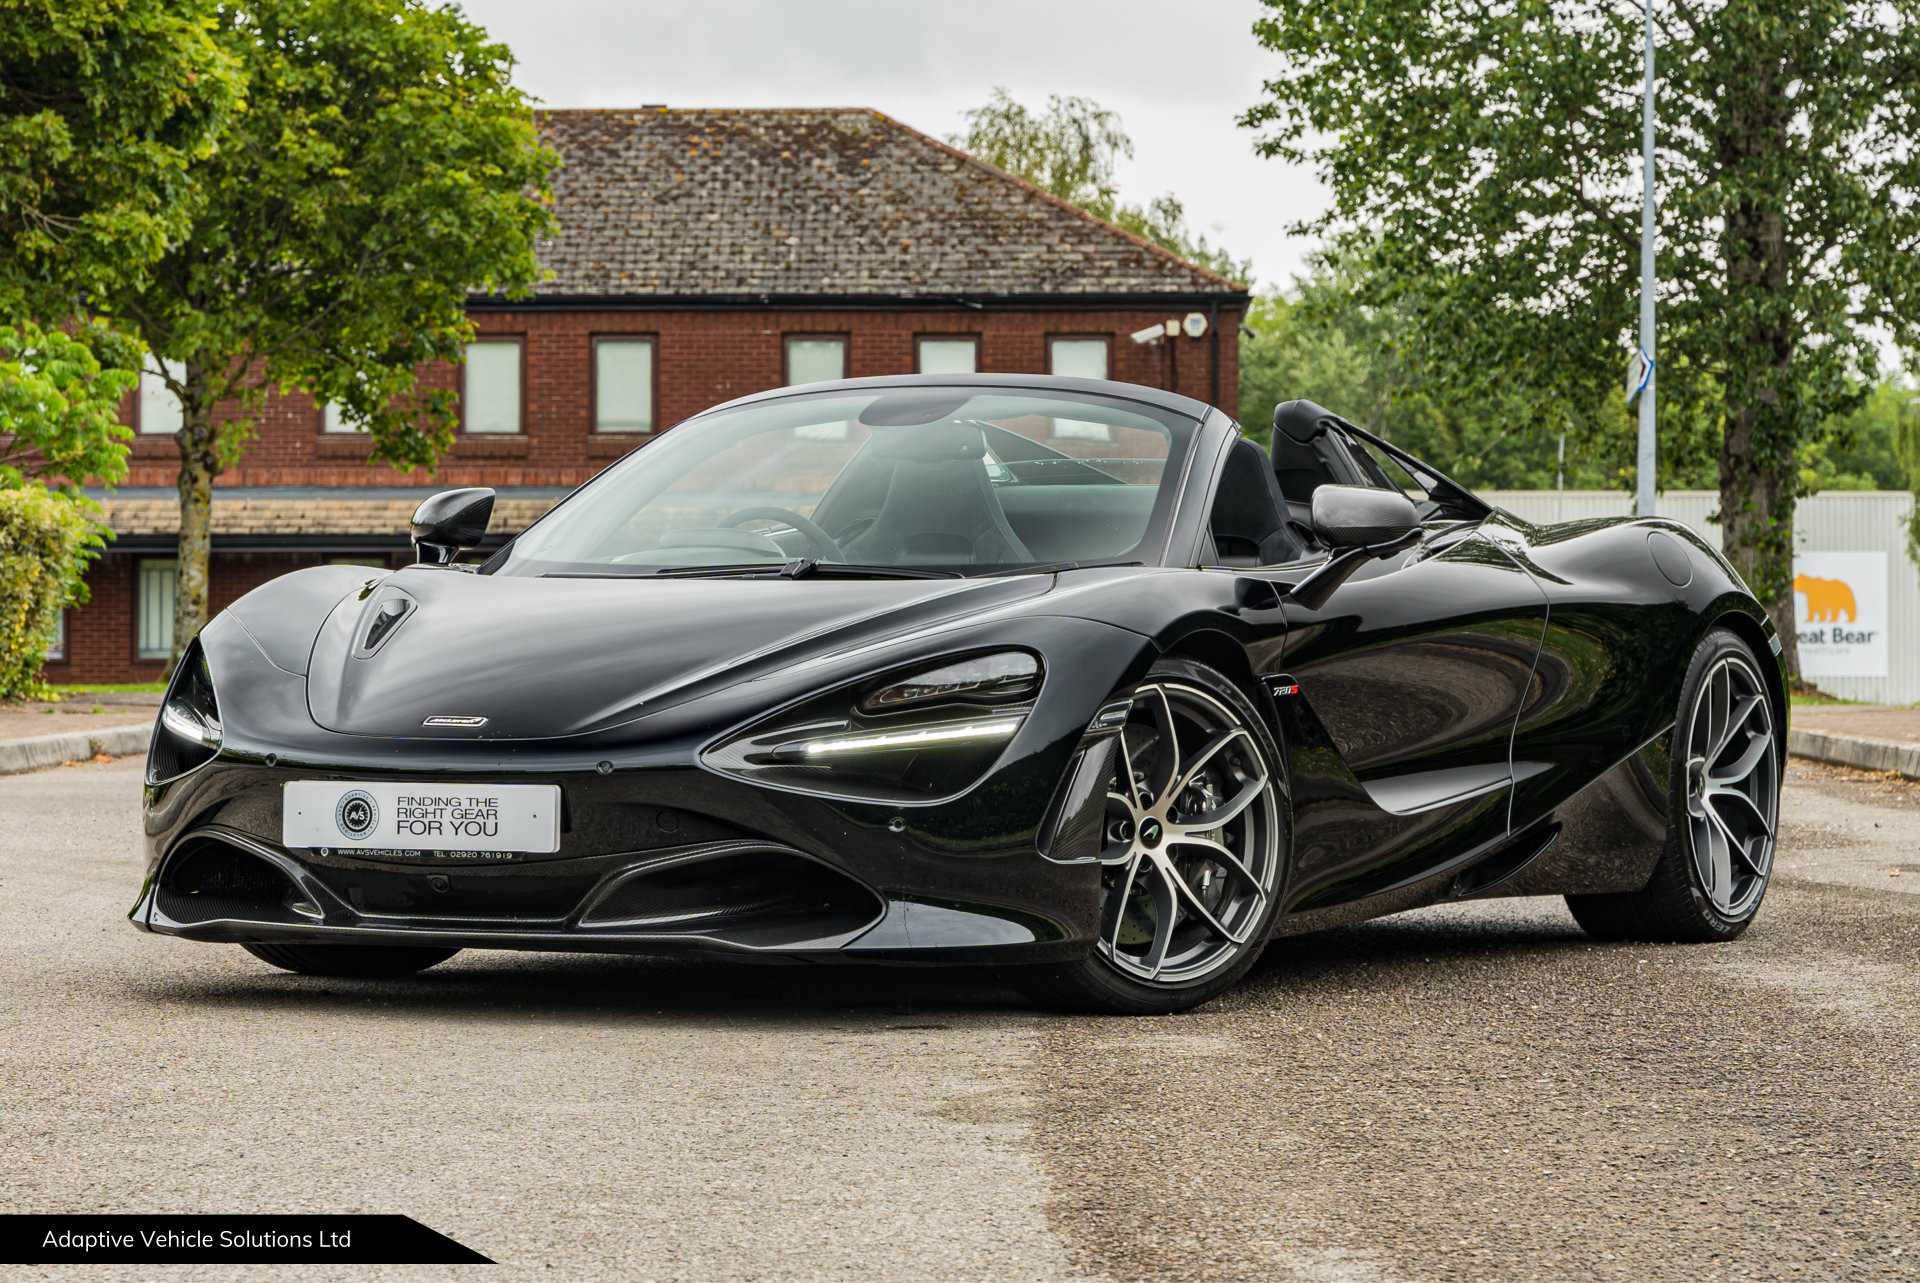 2021 McLaren 720s Spider Performance Black near side front view roof open